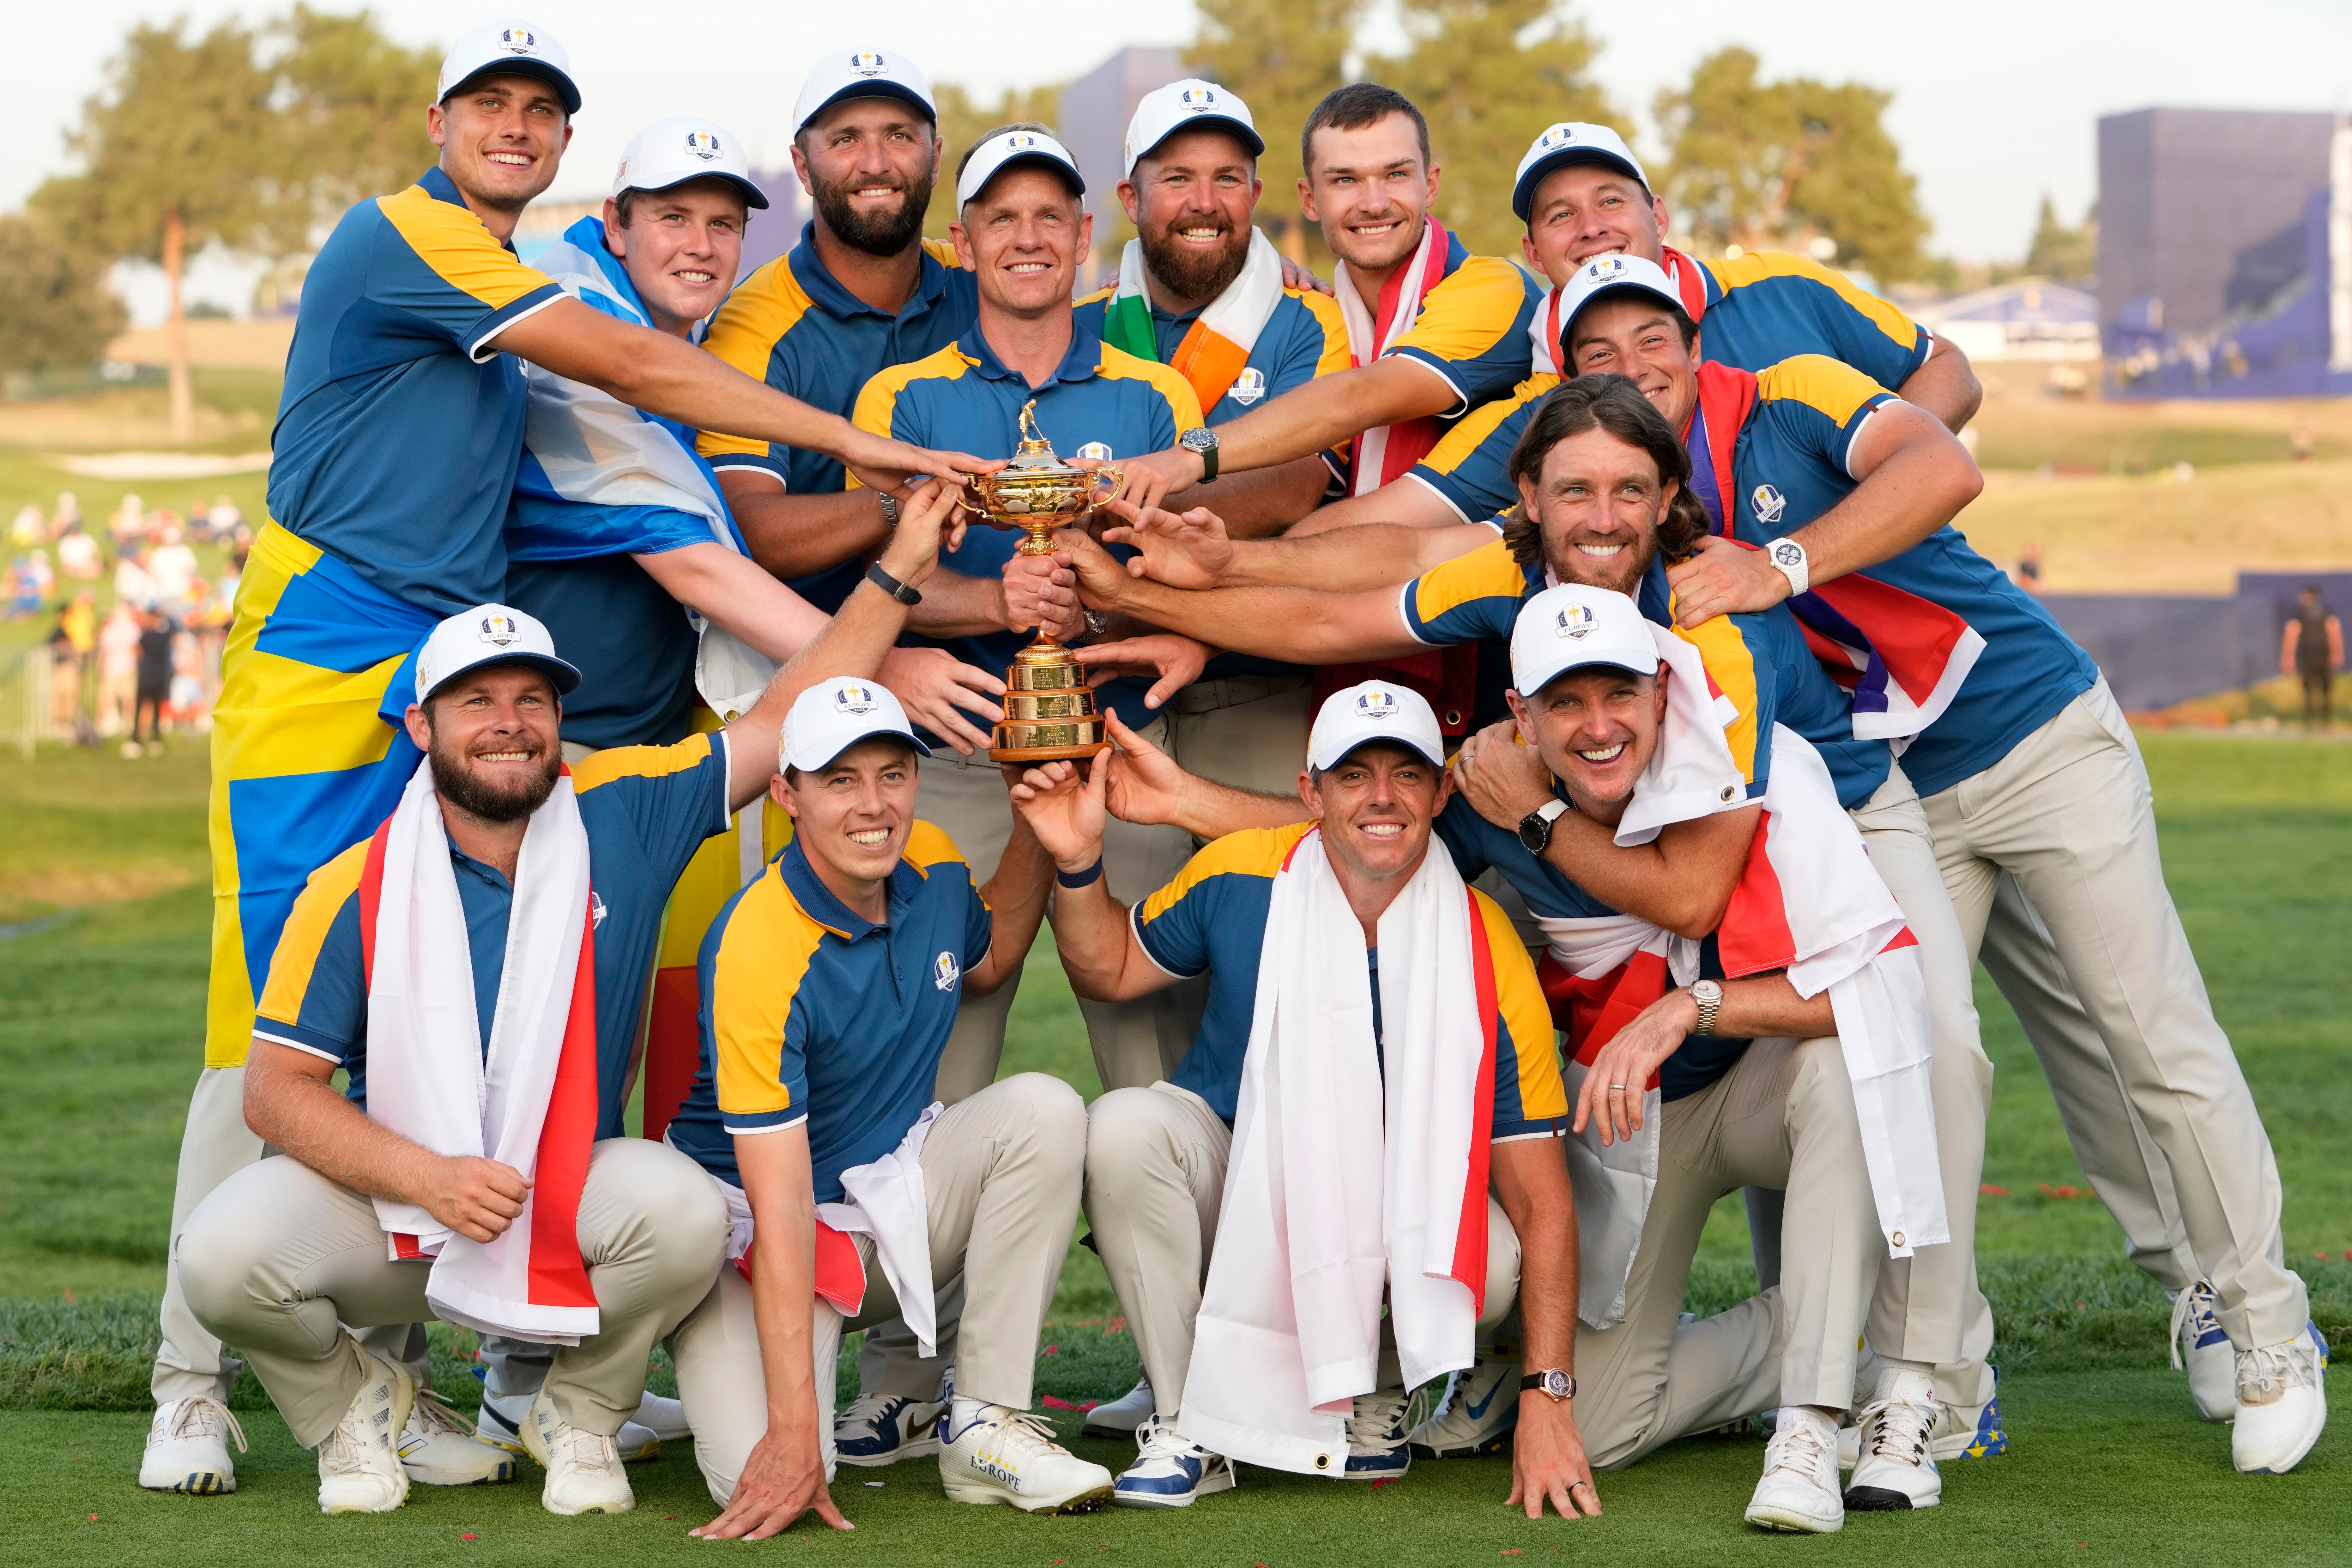 Europe celebrate winning the Ryder Cup on home soil. Now could they repeat the feat in the US?